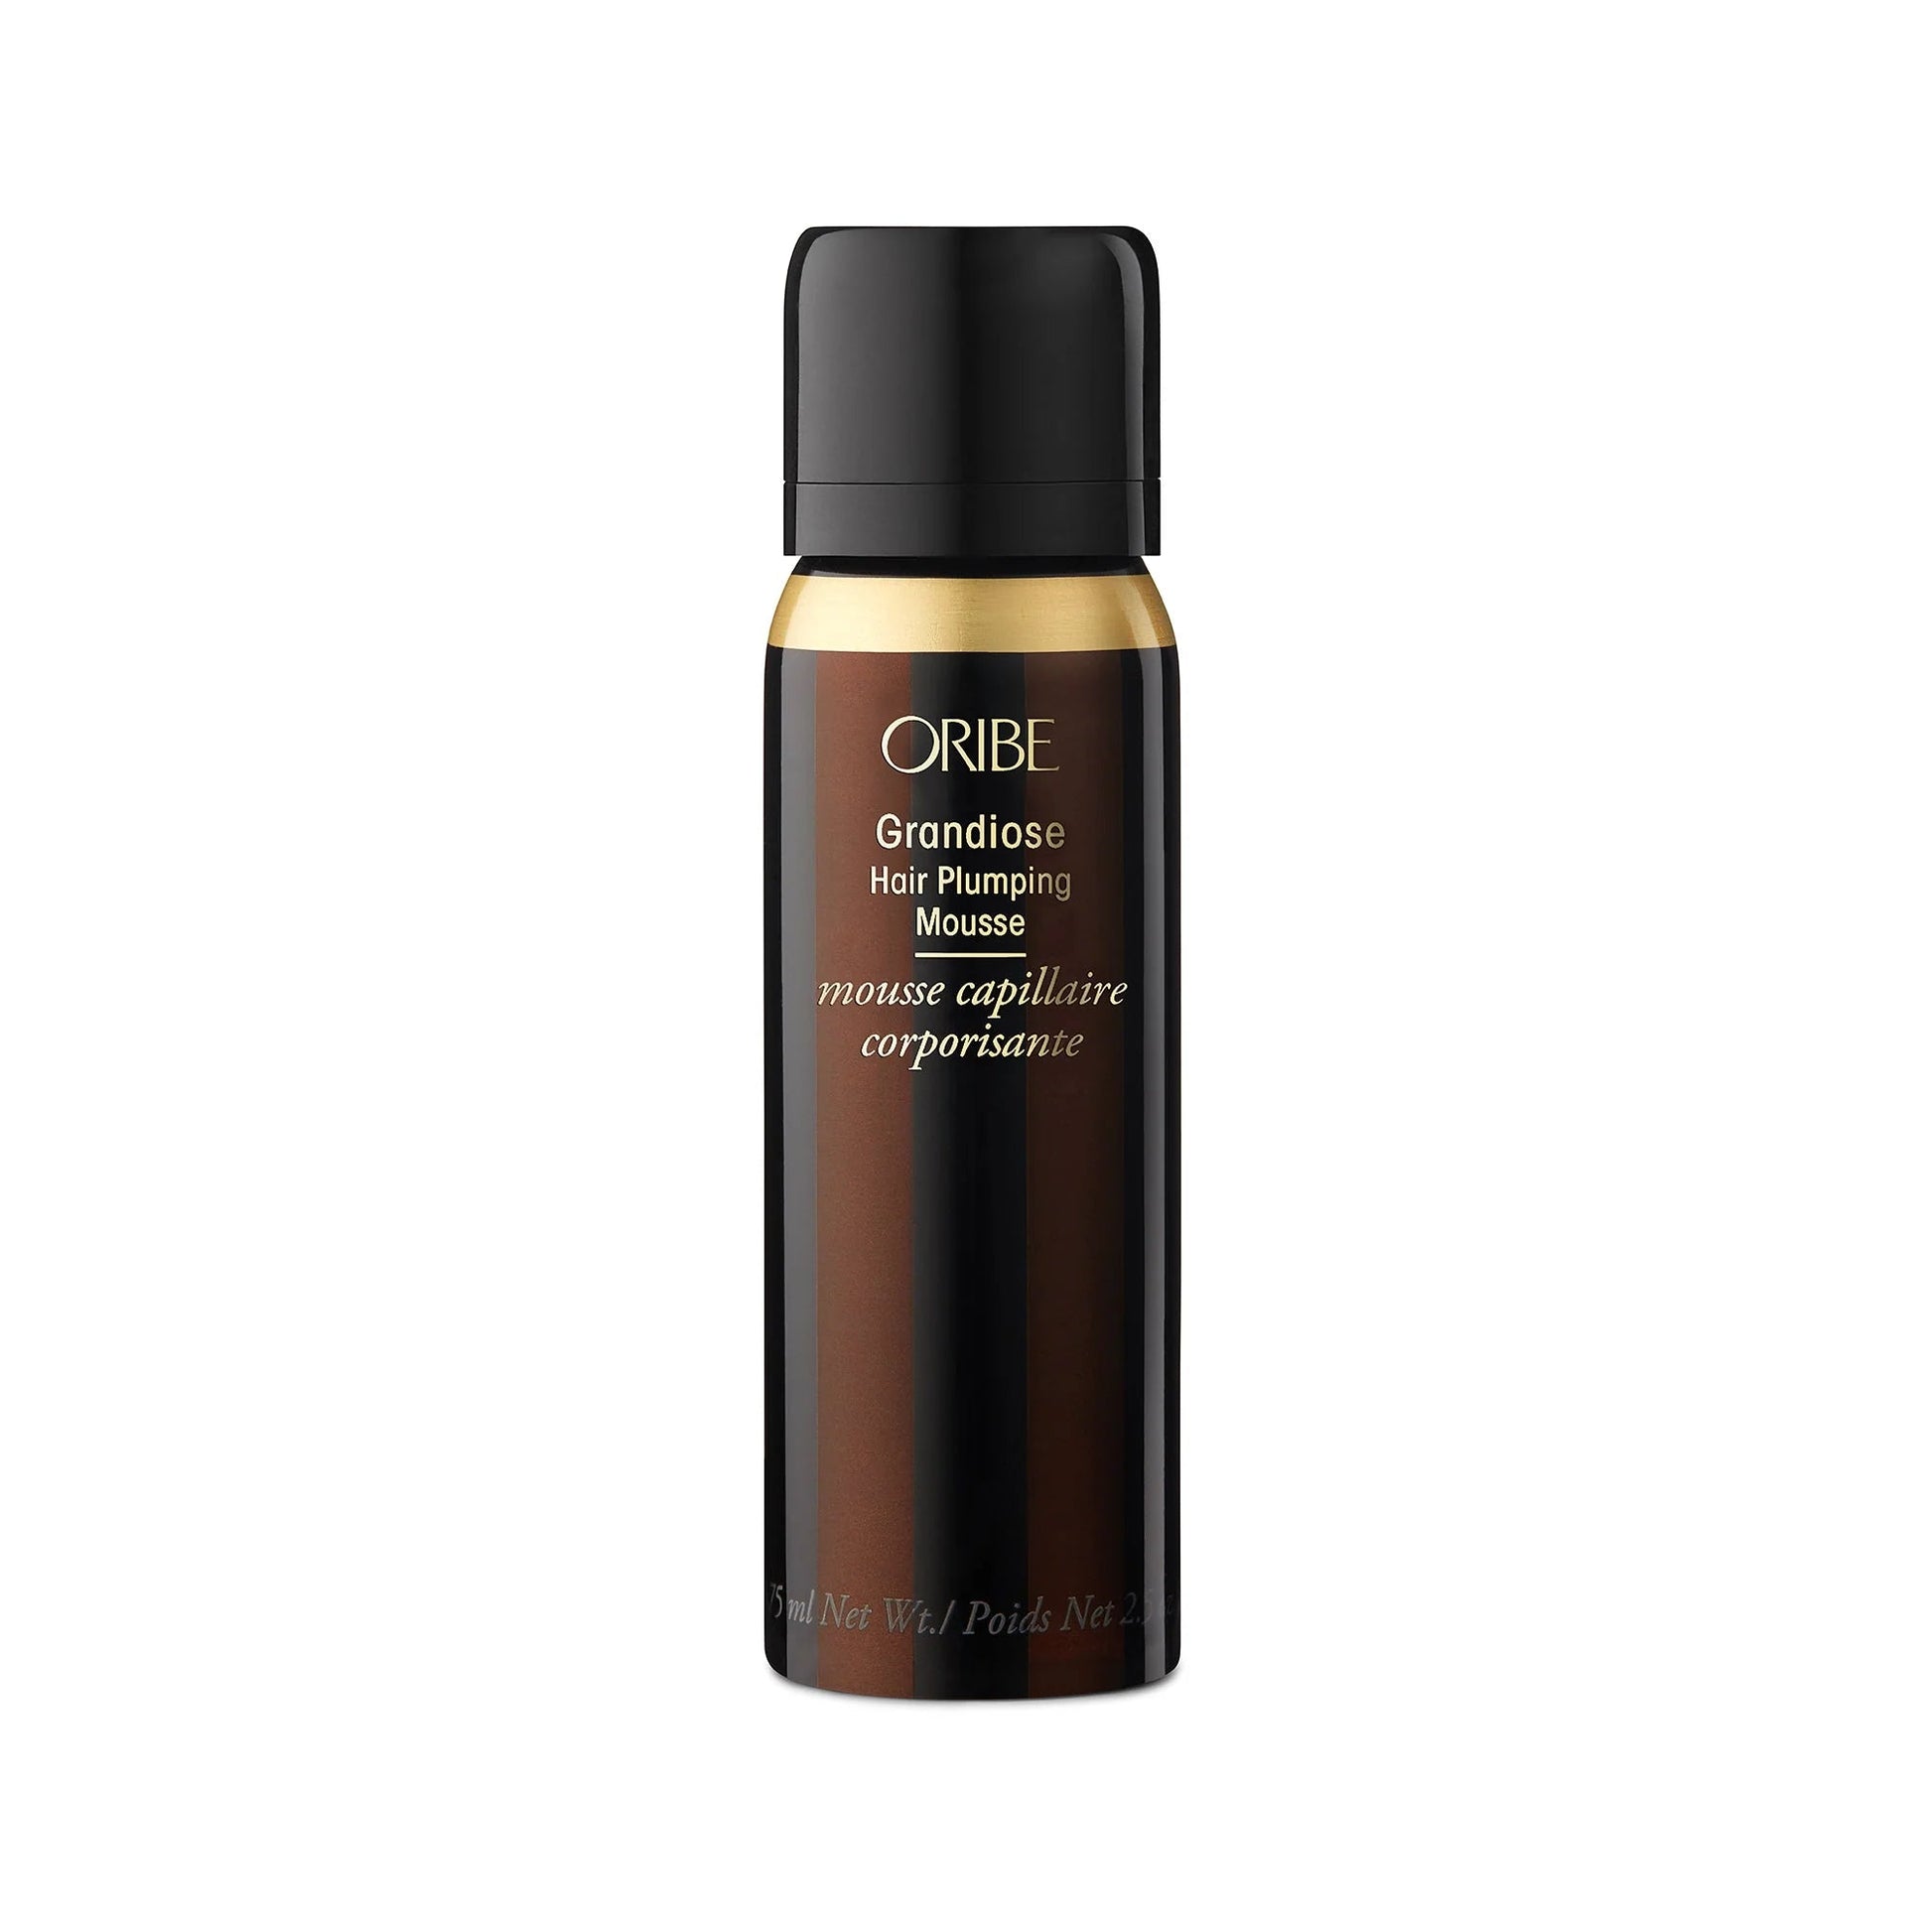 Oribe Grandiose Hair Plumping Mousse - Travel Size - shelley and co